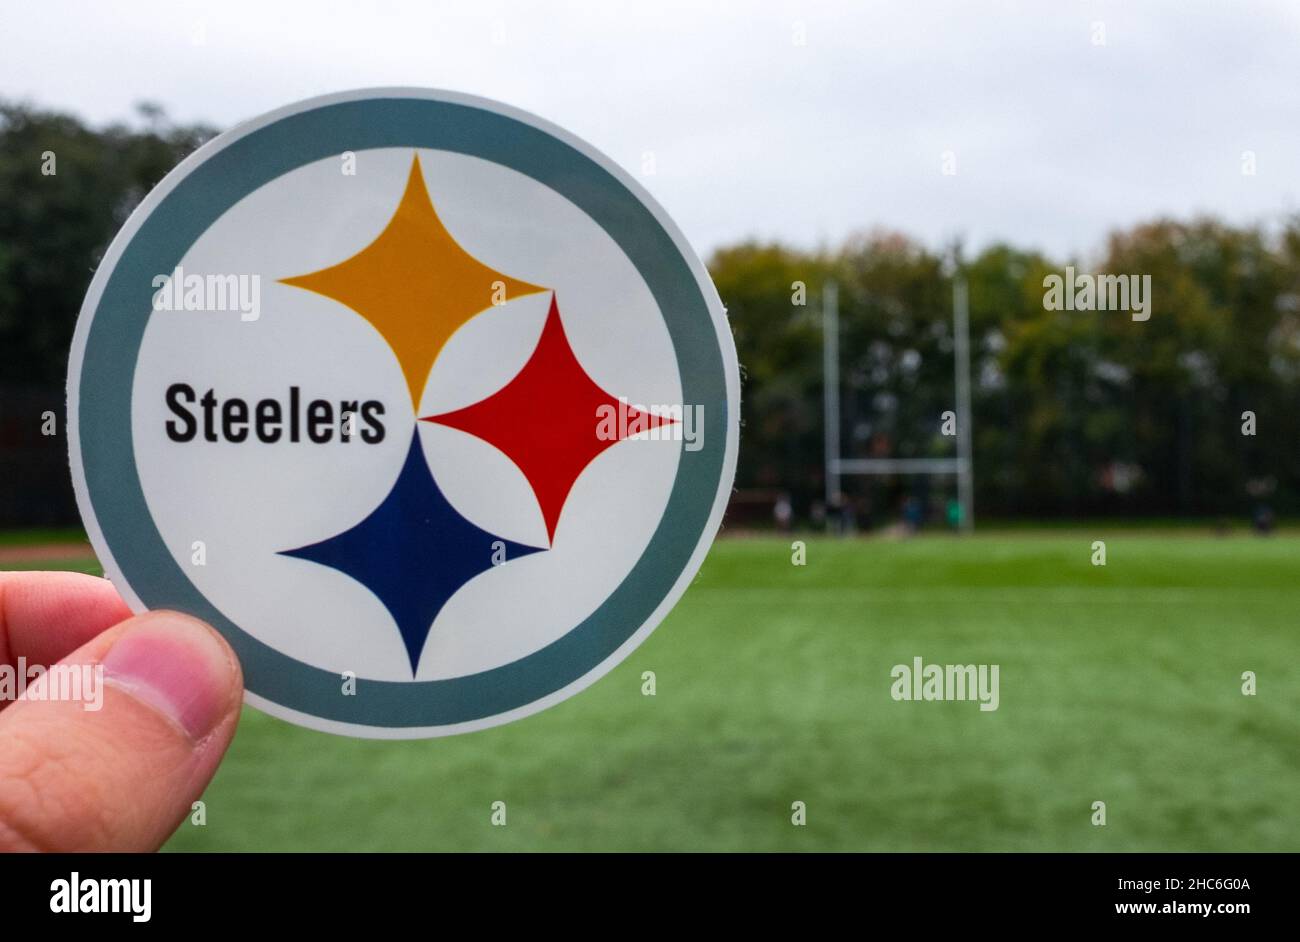 September 16, 2021, Pittsburgh, PA. Emblem of a professional American football team Pittsburgh Steelers based in Pittsburgh at the sports stadium. Stock Photo